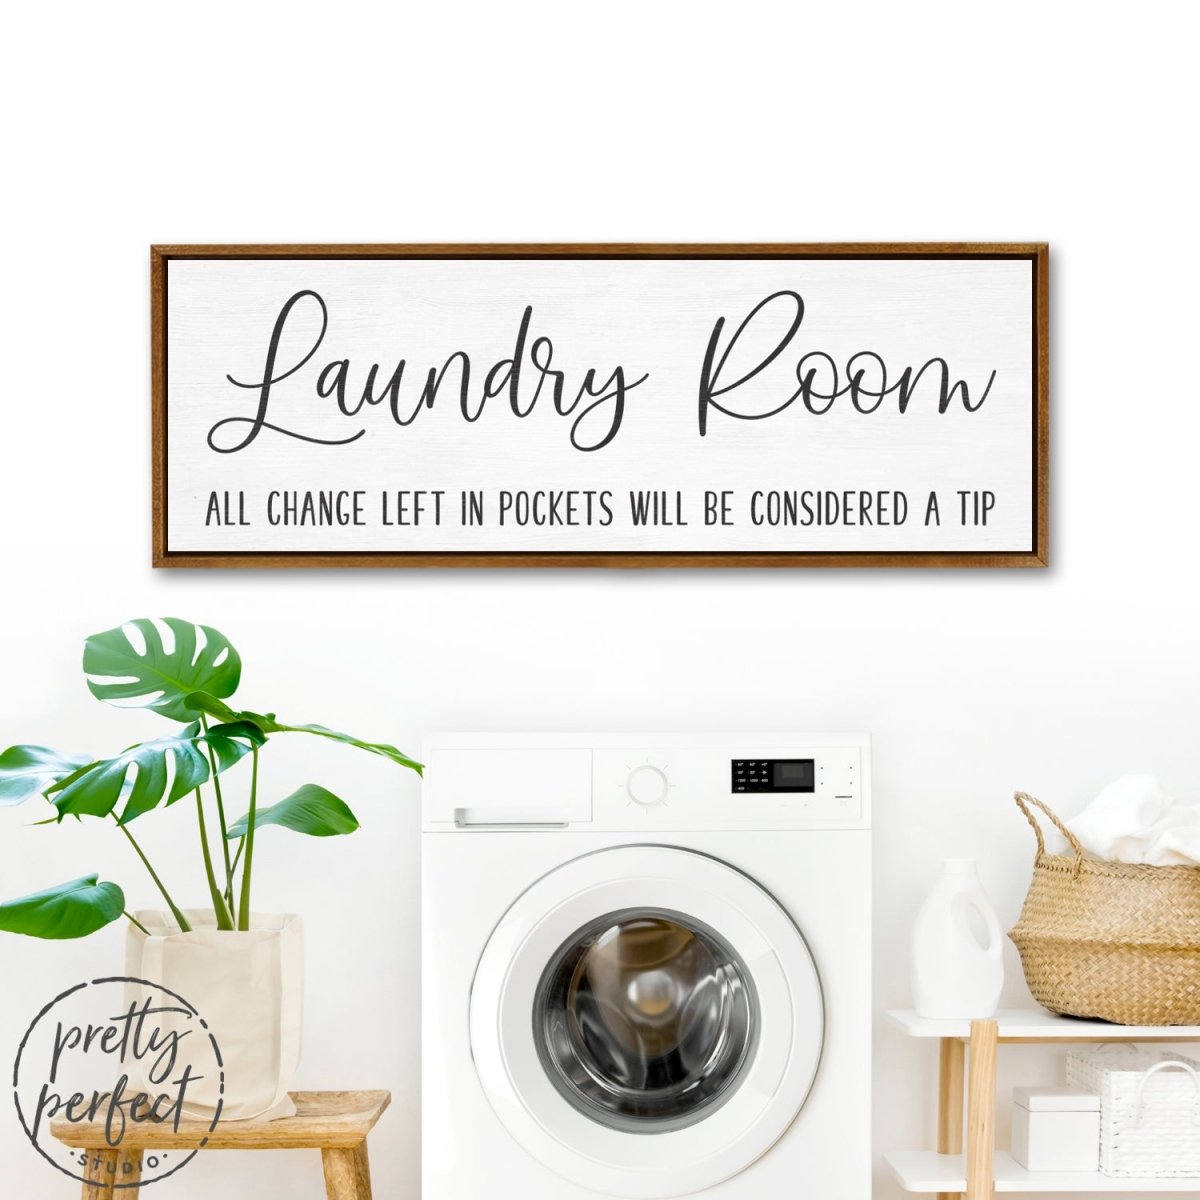 Laundry Room Sign - All Change Left in Pockets Will Be Considered A Tip - Pretty Perfect Studio 